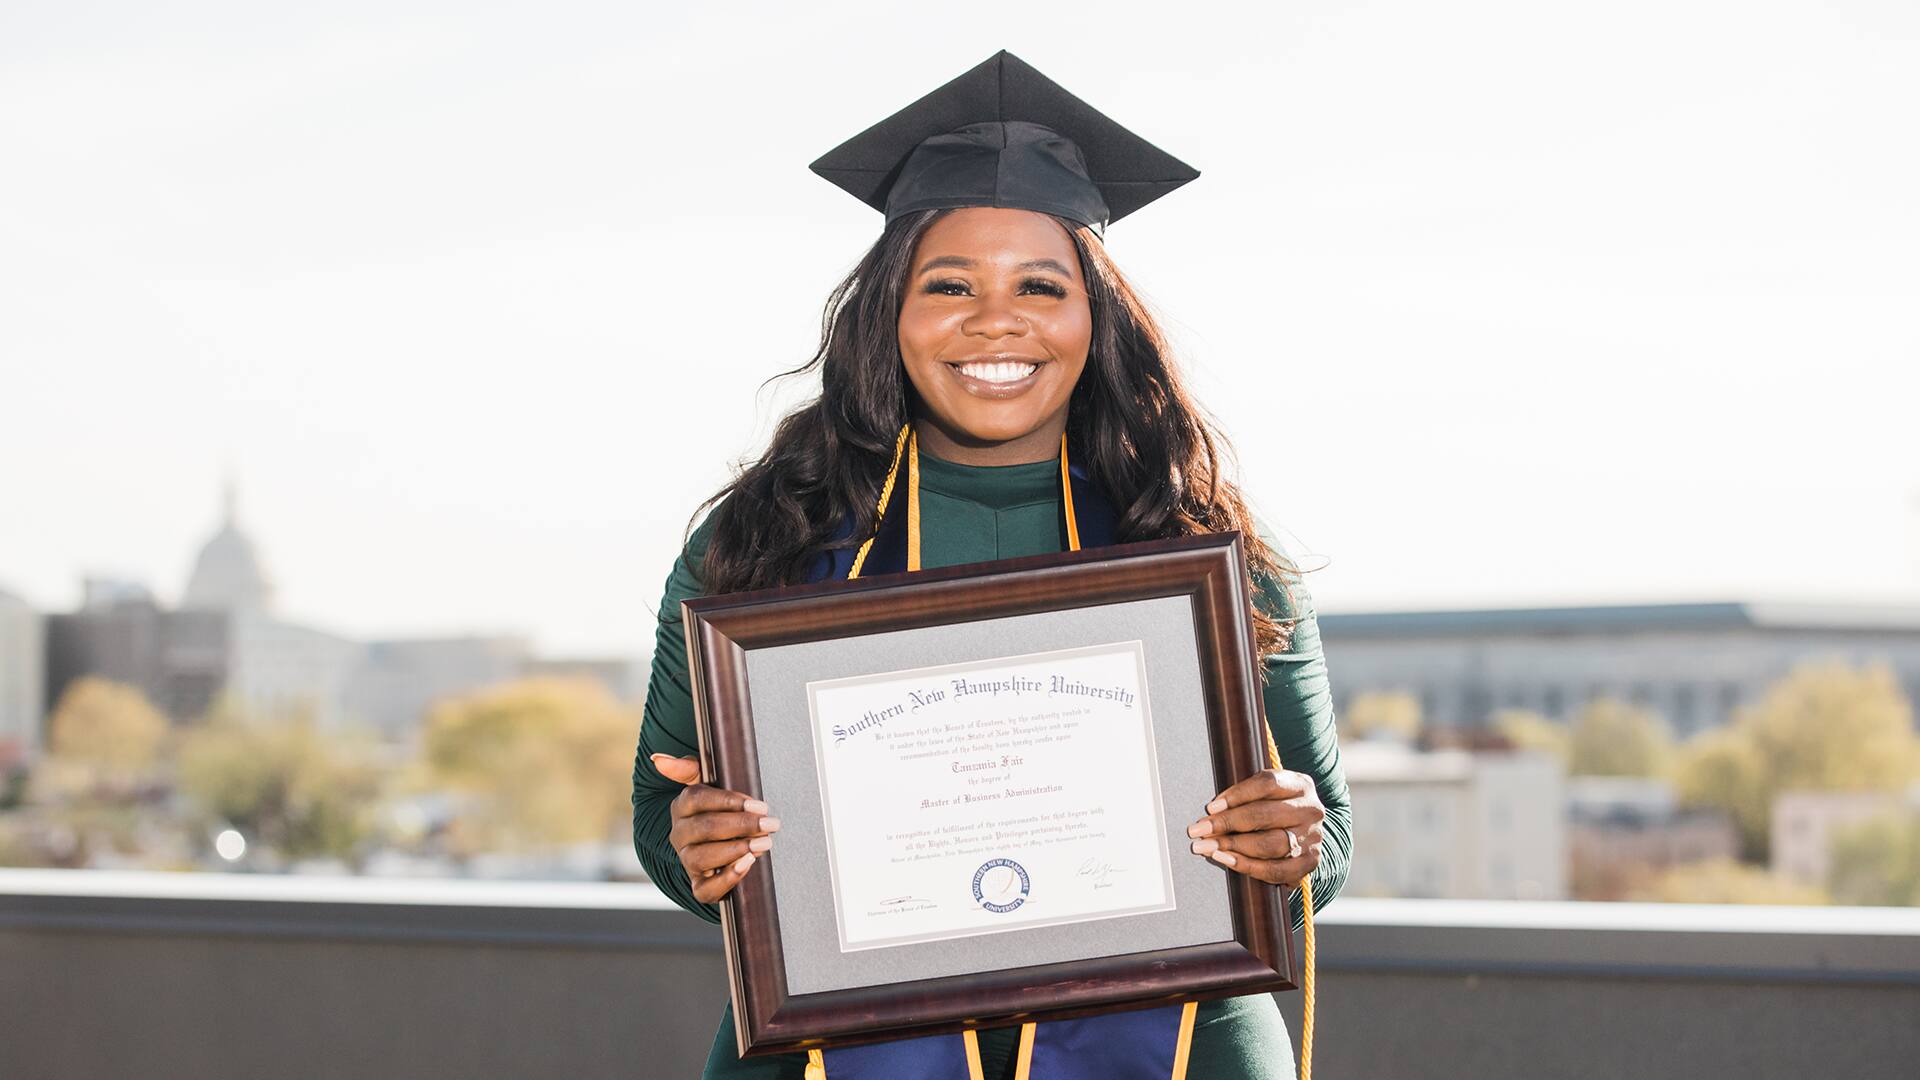 Tanzania Fair, who earned her degree from SNHU in 2020, wearing her cap and gown and holding her framed diploma in front of her.